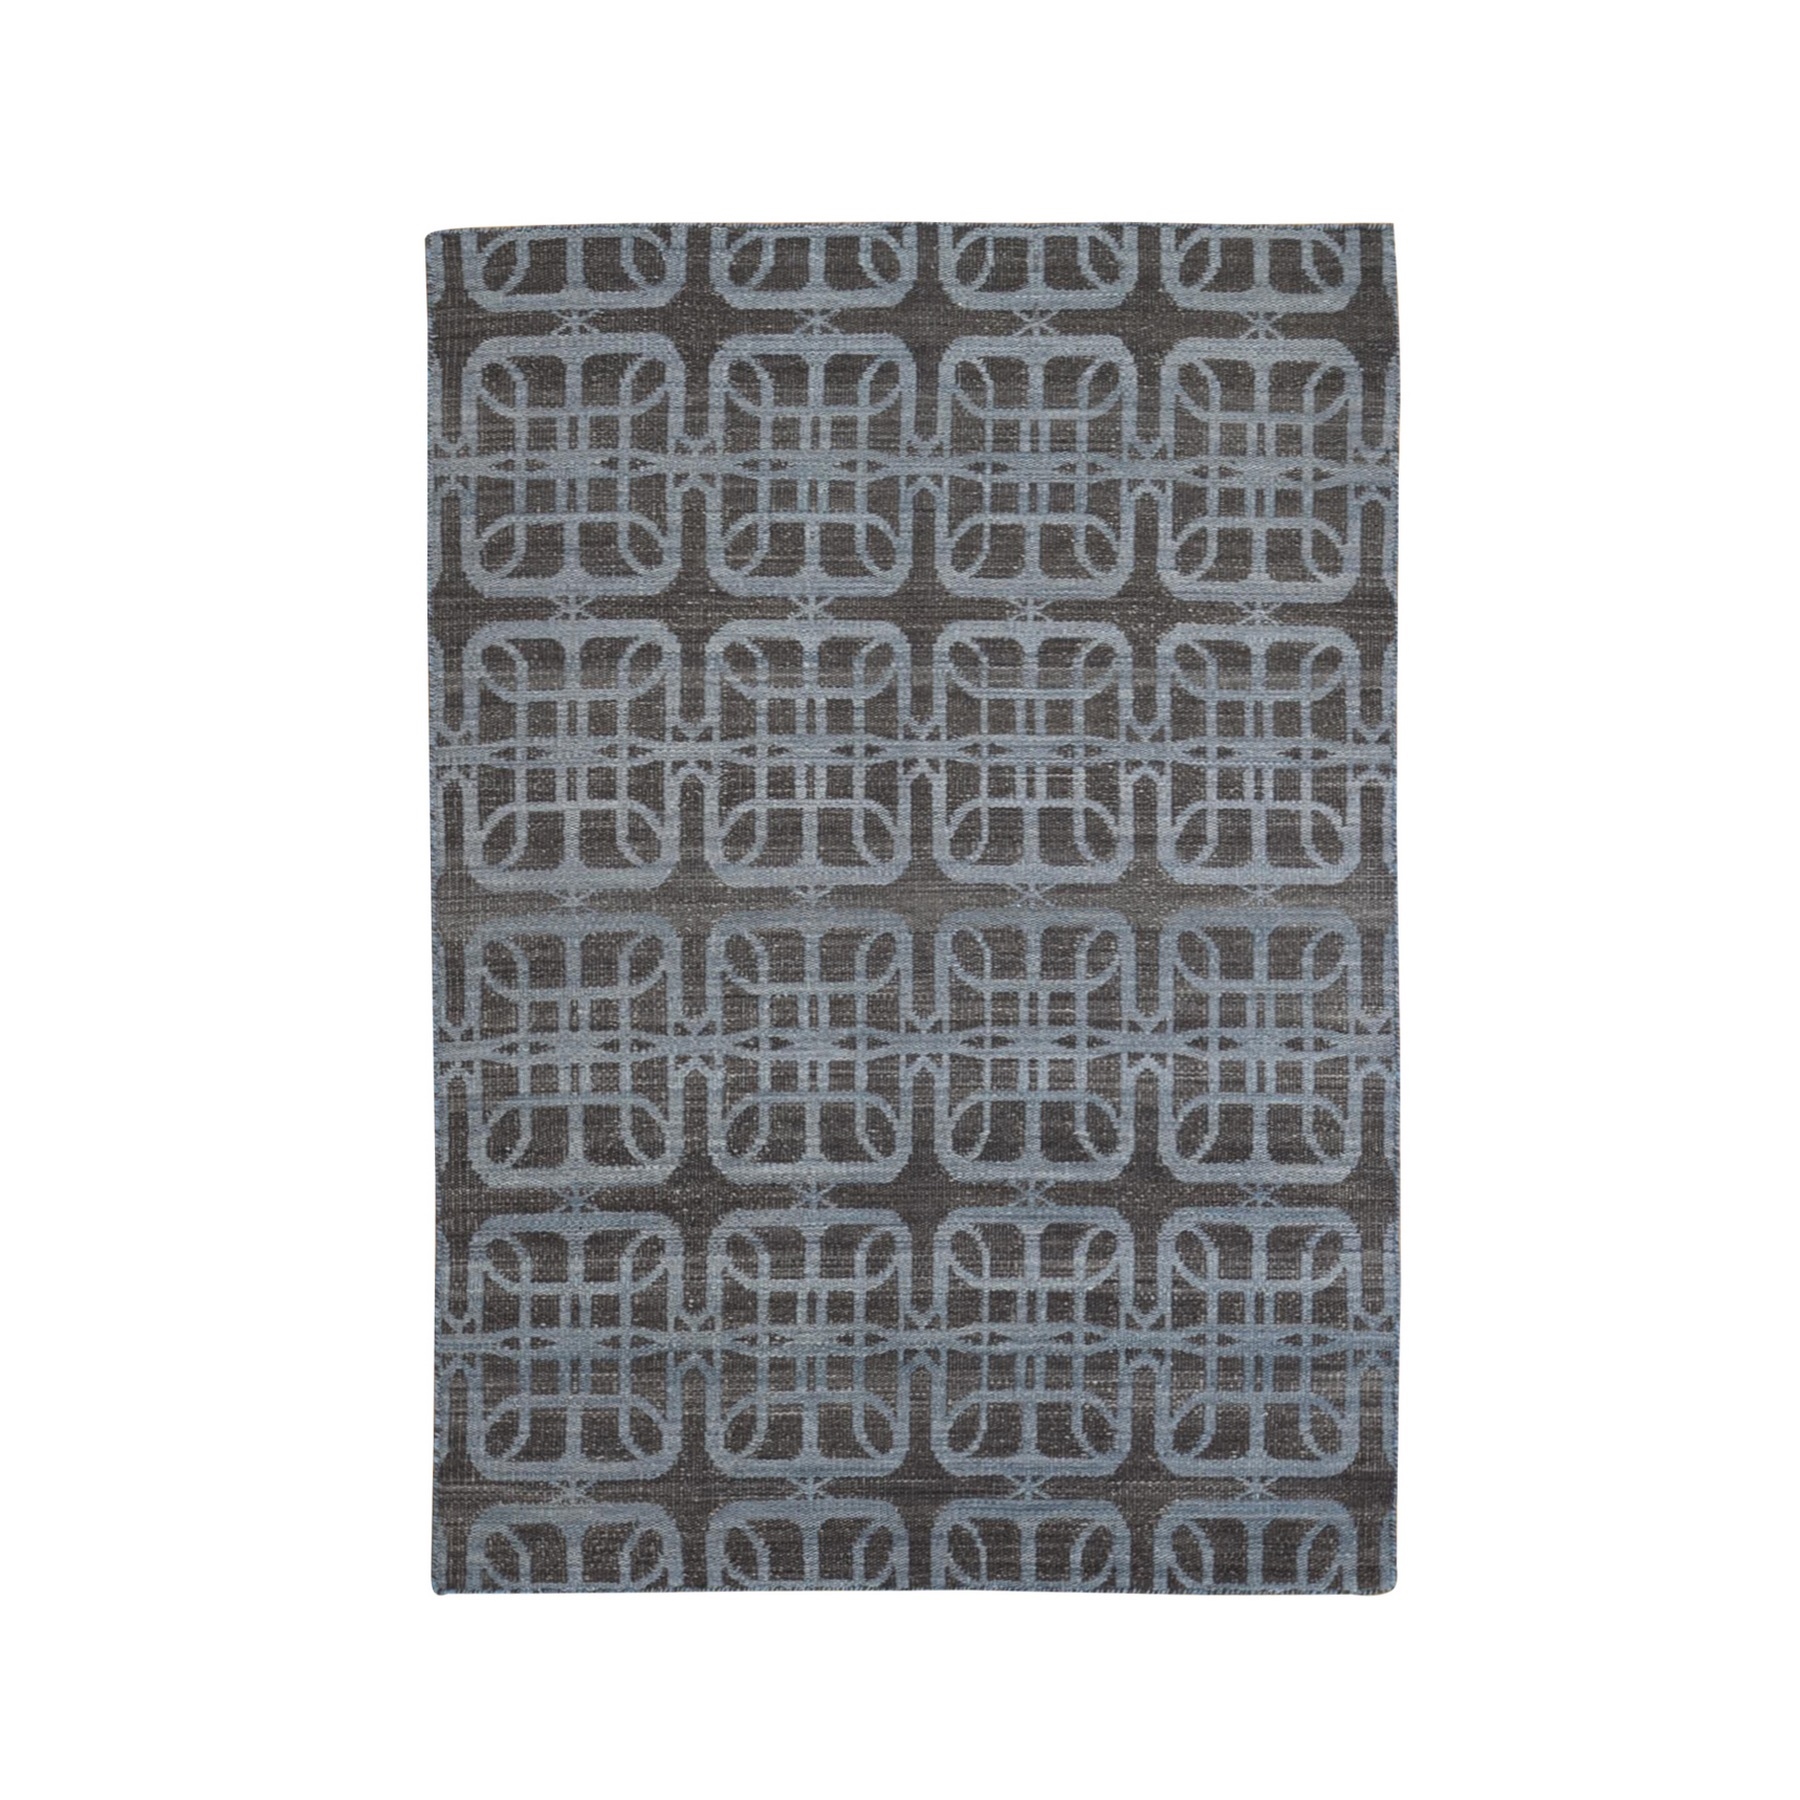 Traditional Wool Hand-Woven Area Rug 4'0